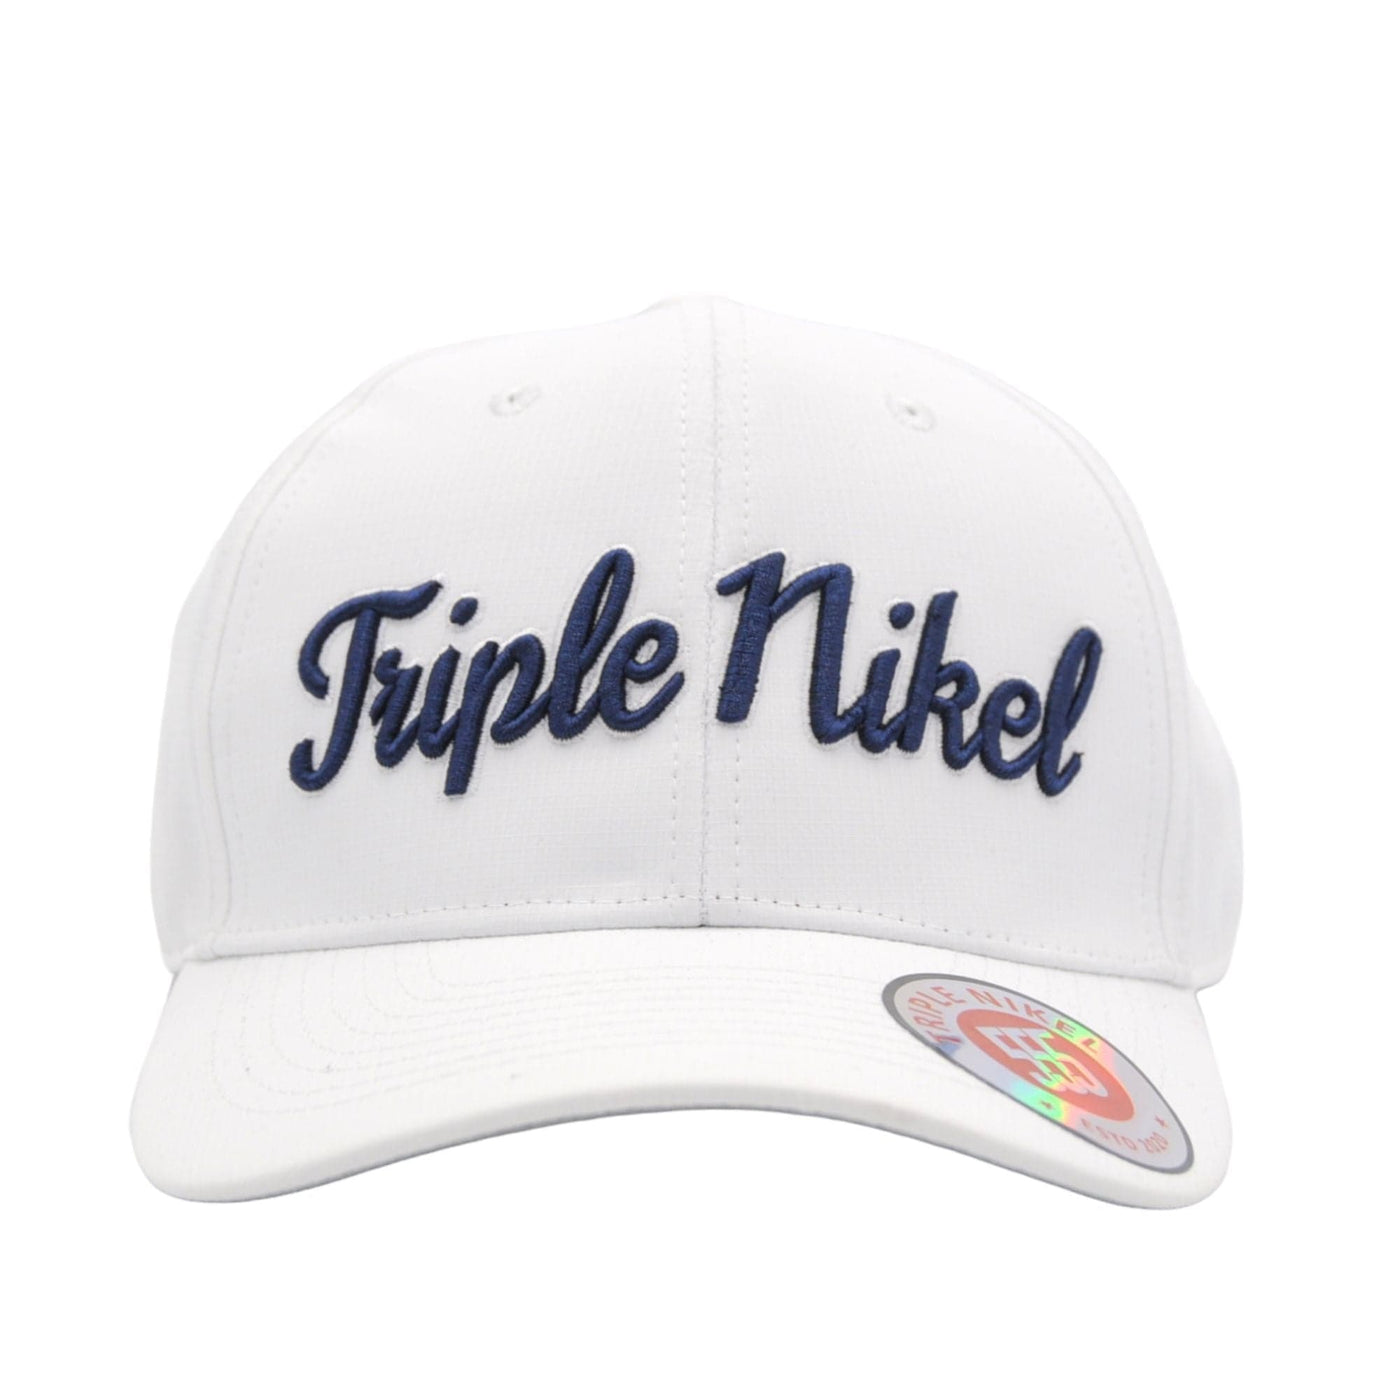 Triple Nikel Hats ONE SIZE FITS ALL / White / Golf Wear Triple Nikel Golf Wear Performance UNISEX Adjustable Golf Hat